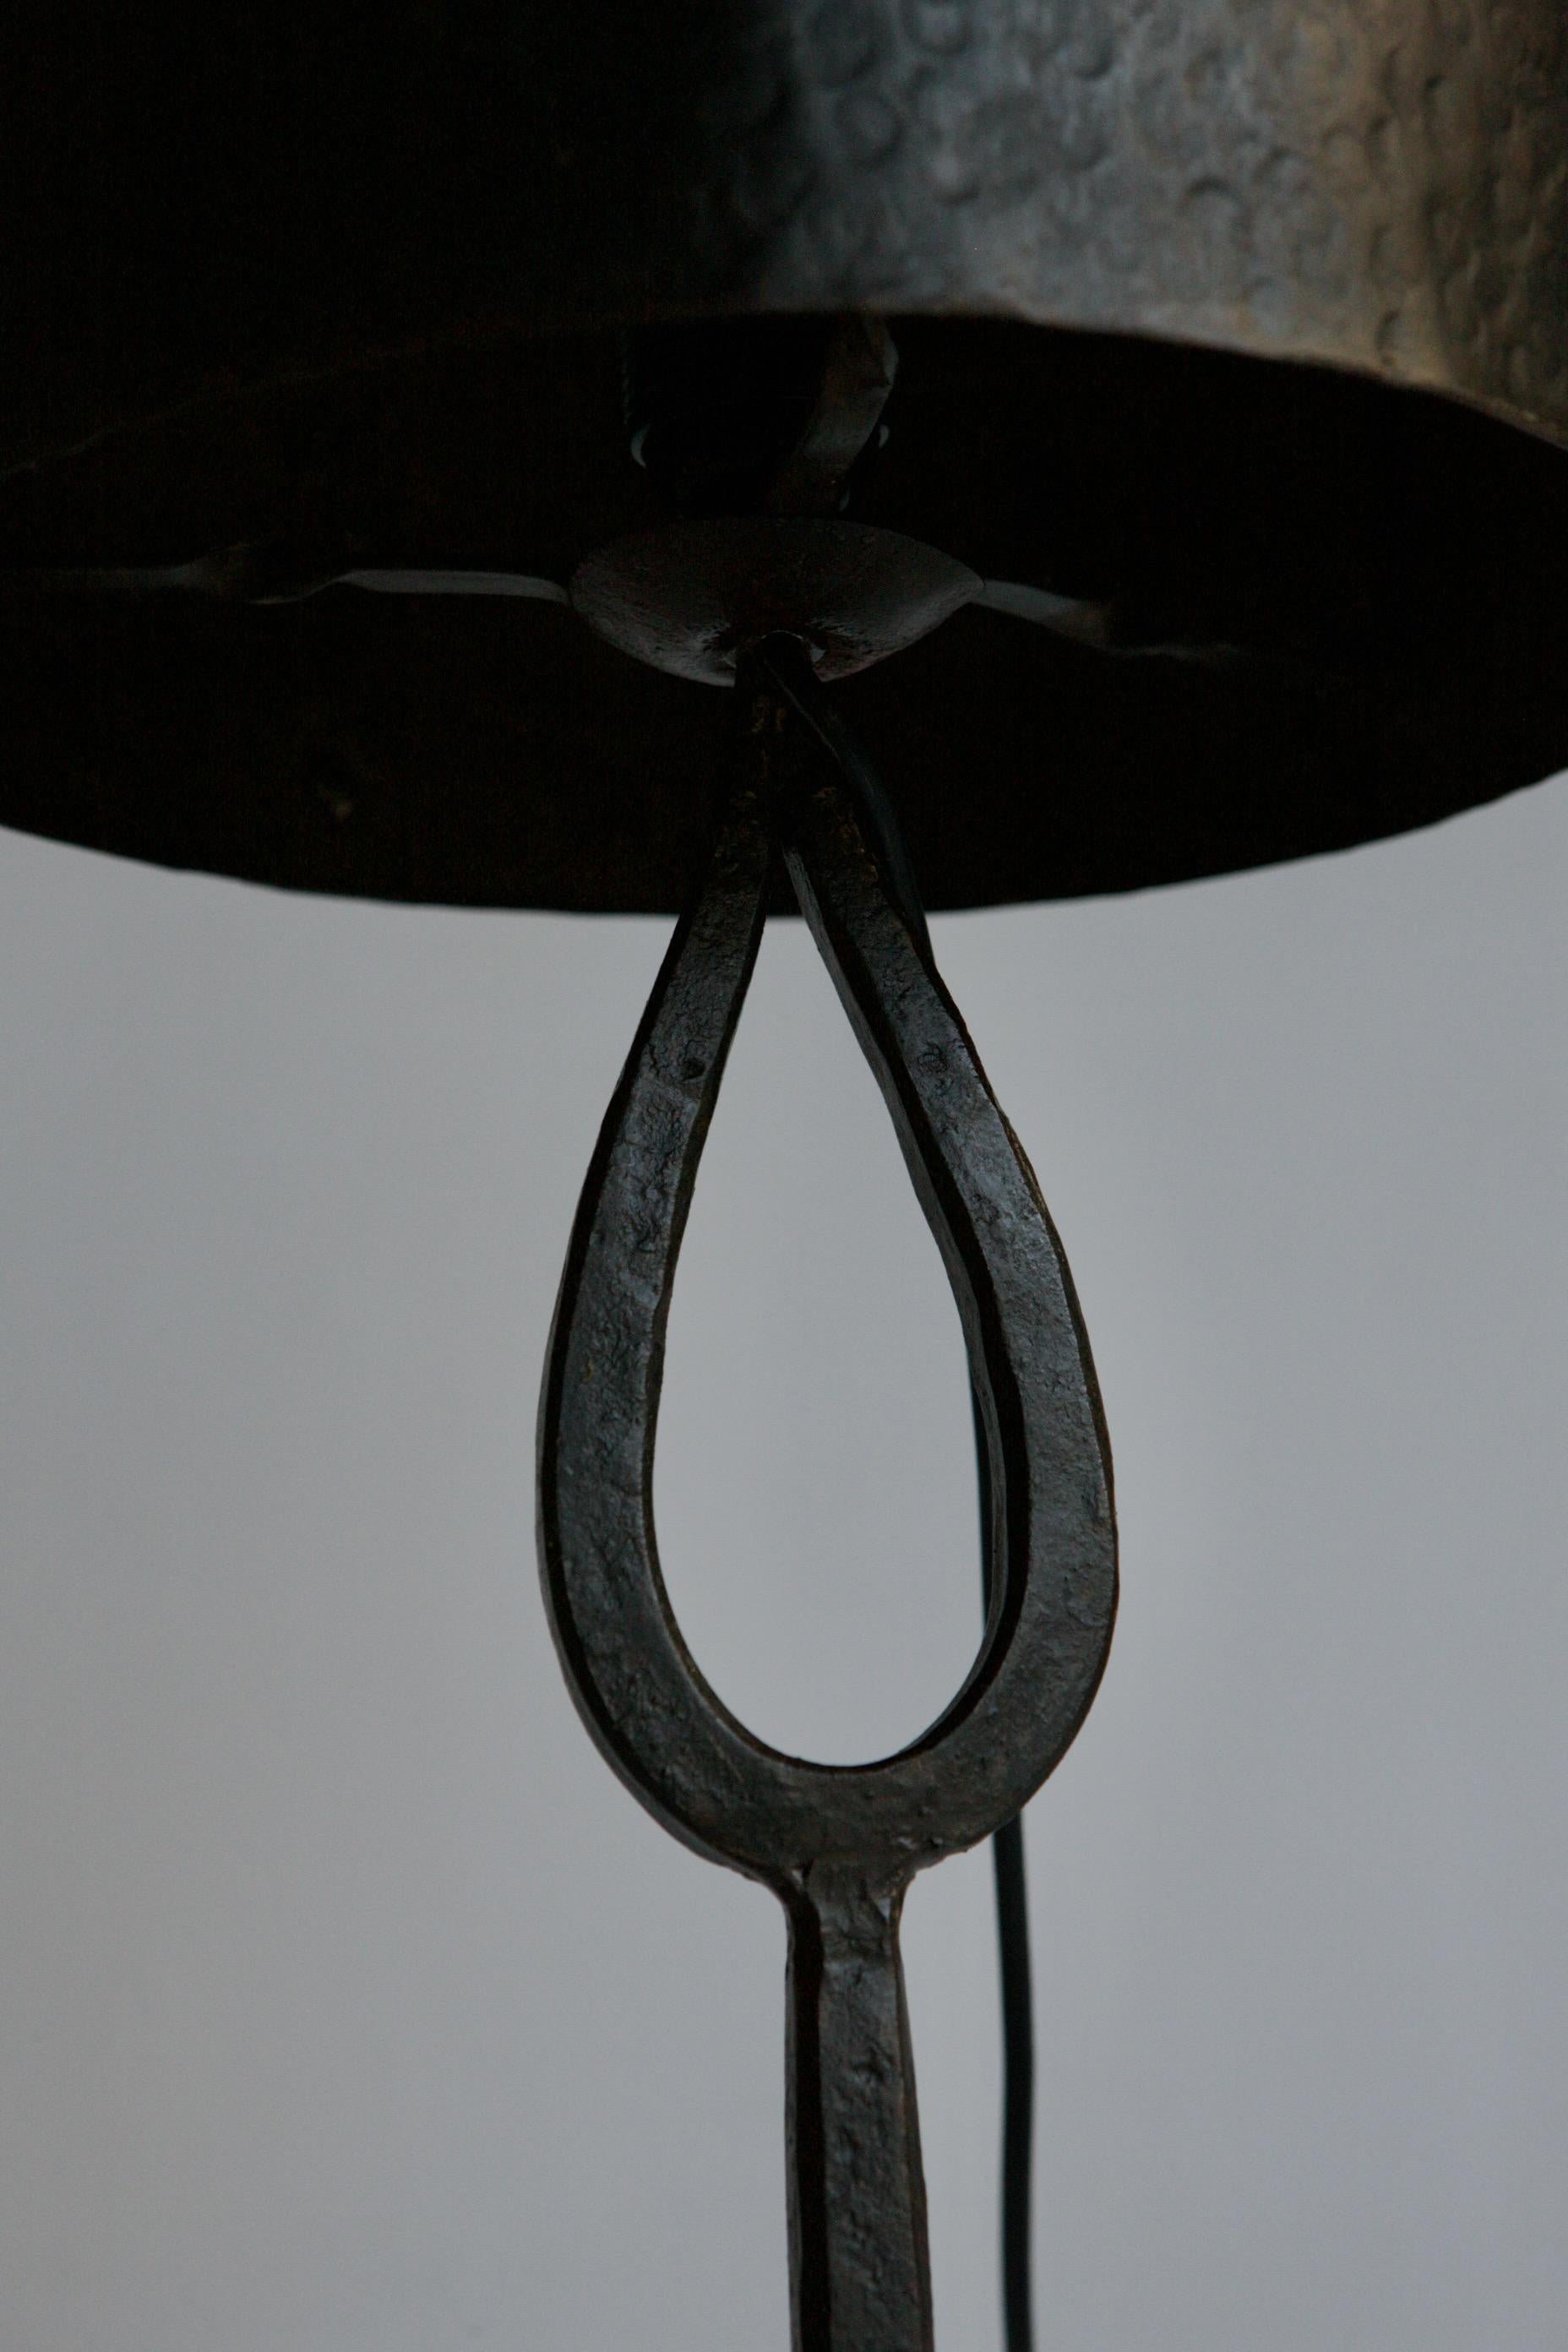 A artisan wrought iron table lamp. Made in 1960's France by a metalworker. The asymmetric shade has a hammered textured and the over all feel is reminiscent of a Calder sculpture.